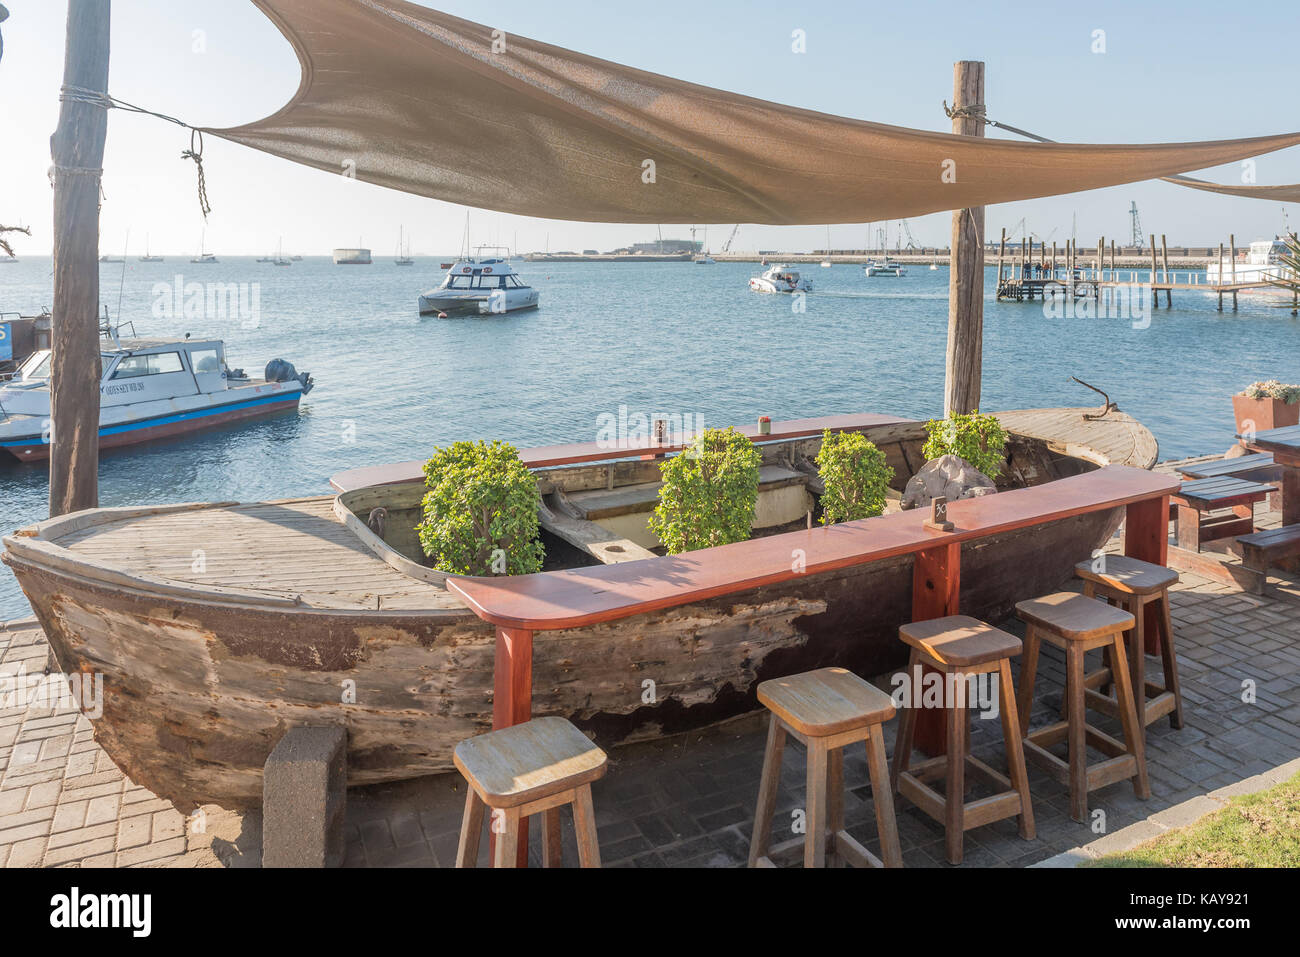 WALVIS BAY, NAMIBIA - JULY 1, 2017: A boat used as restaurant table at the watefront in Walvis Bay on the Atlantic Coast of Namibia Stock Photo